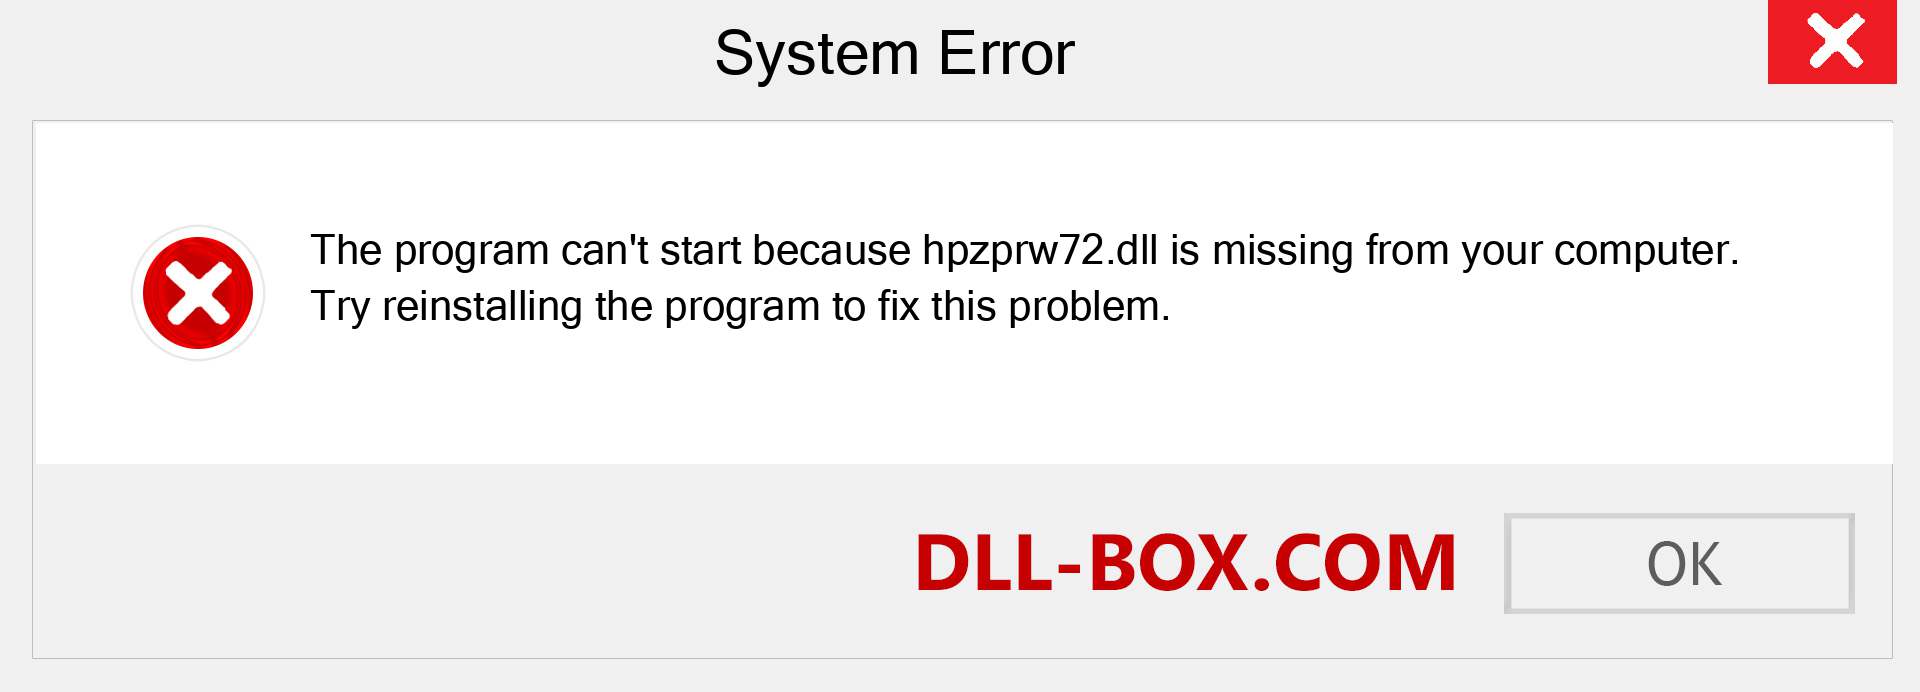  hpzprw72.dll file is missing?. Download for Windows 7, 8, 10 - Fix  hpzprw72 dll Missing Error on Windows, photos, images